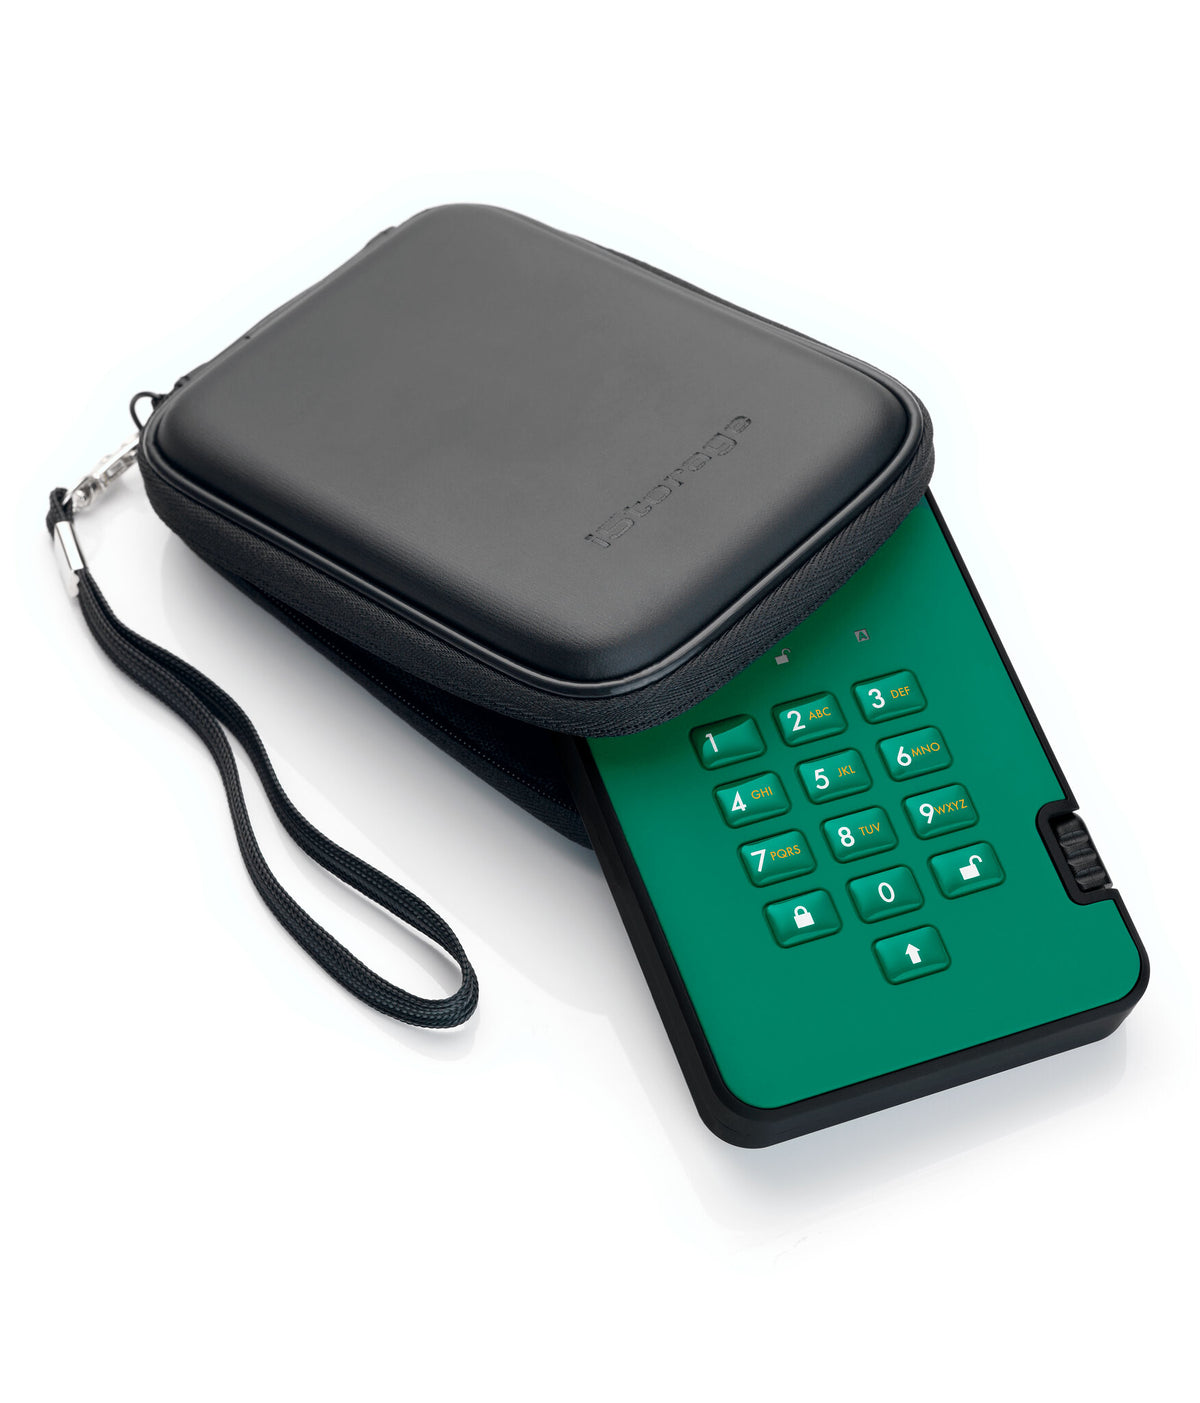 iStorage diskAshur2 - Secure Encrypted External solid state drive in Green - 128 GB